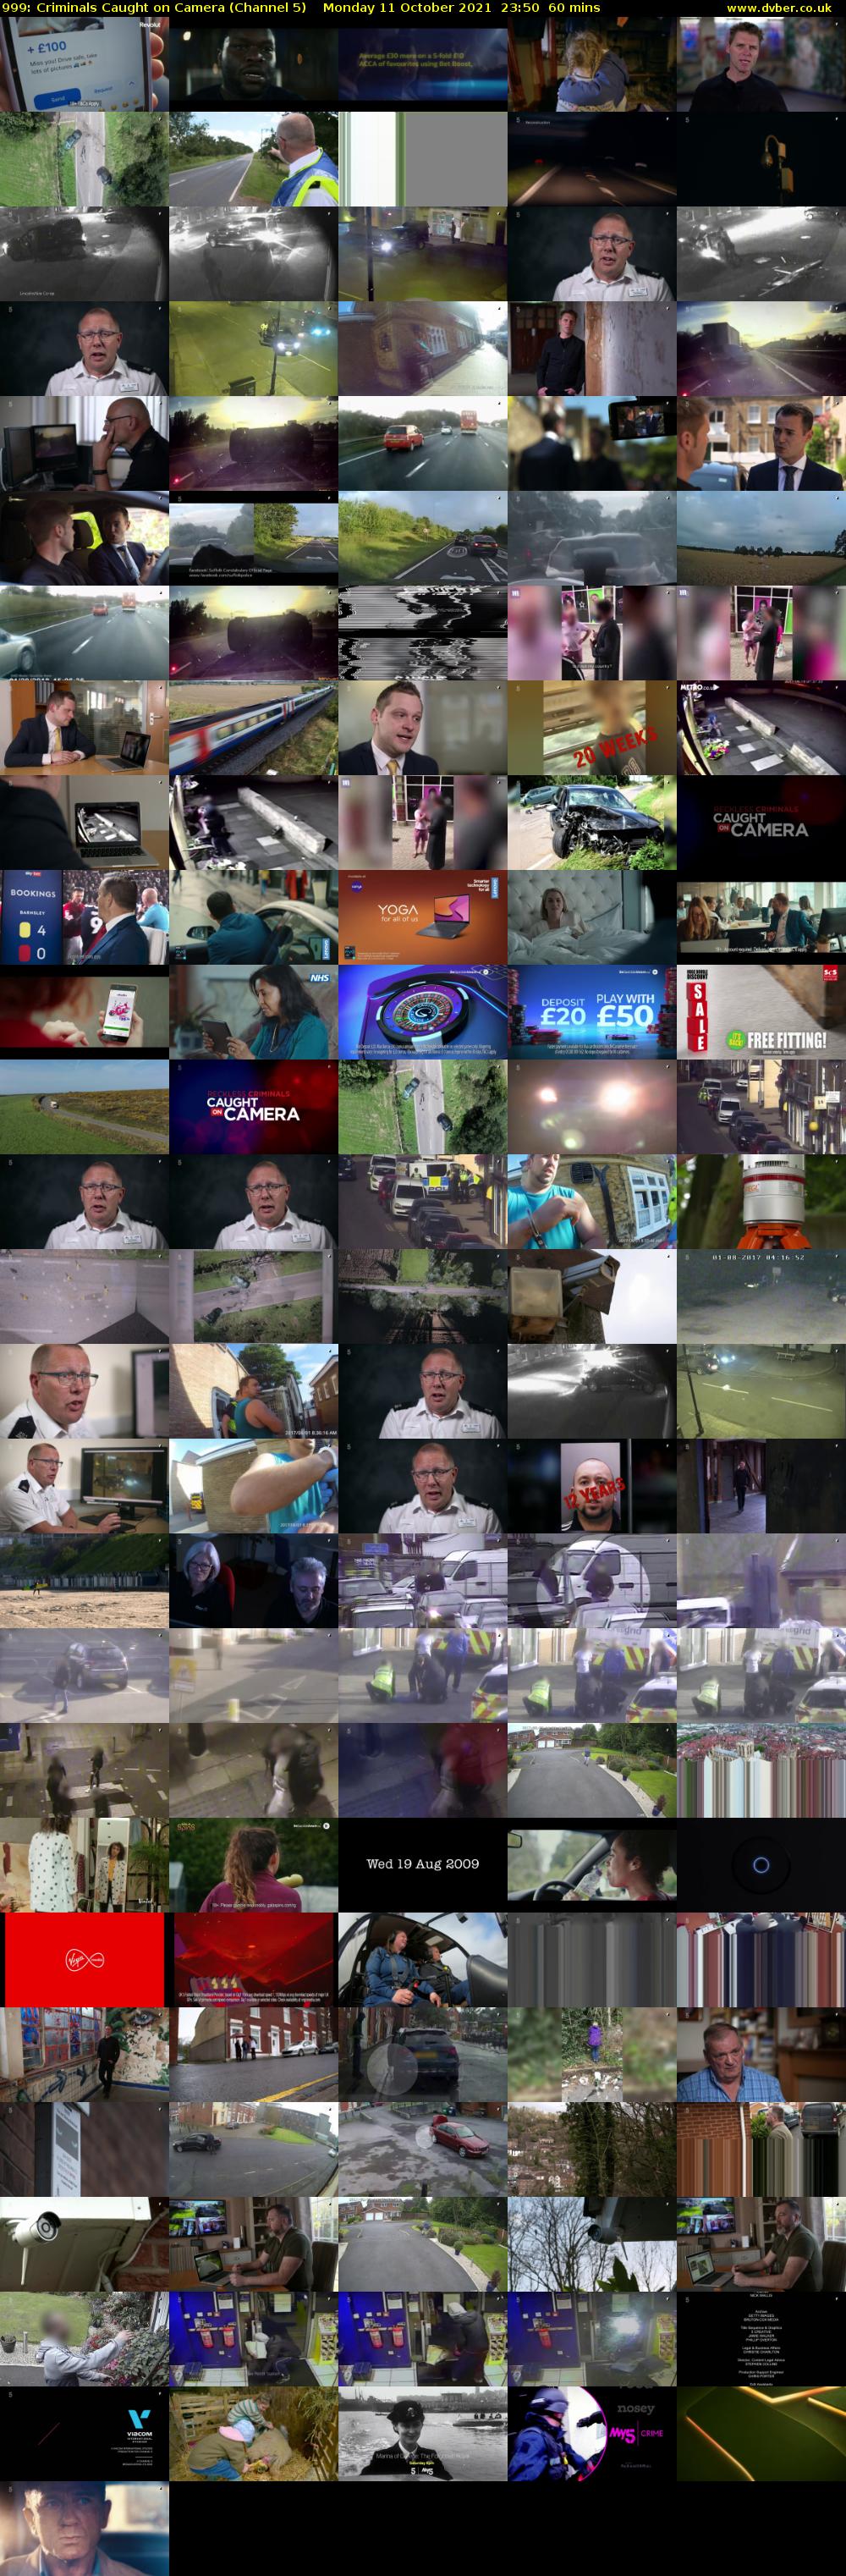 999: Criminals Caught on Camera (Channel 5) Monday 11 October 2021 23:50 - 00:50